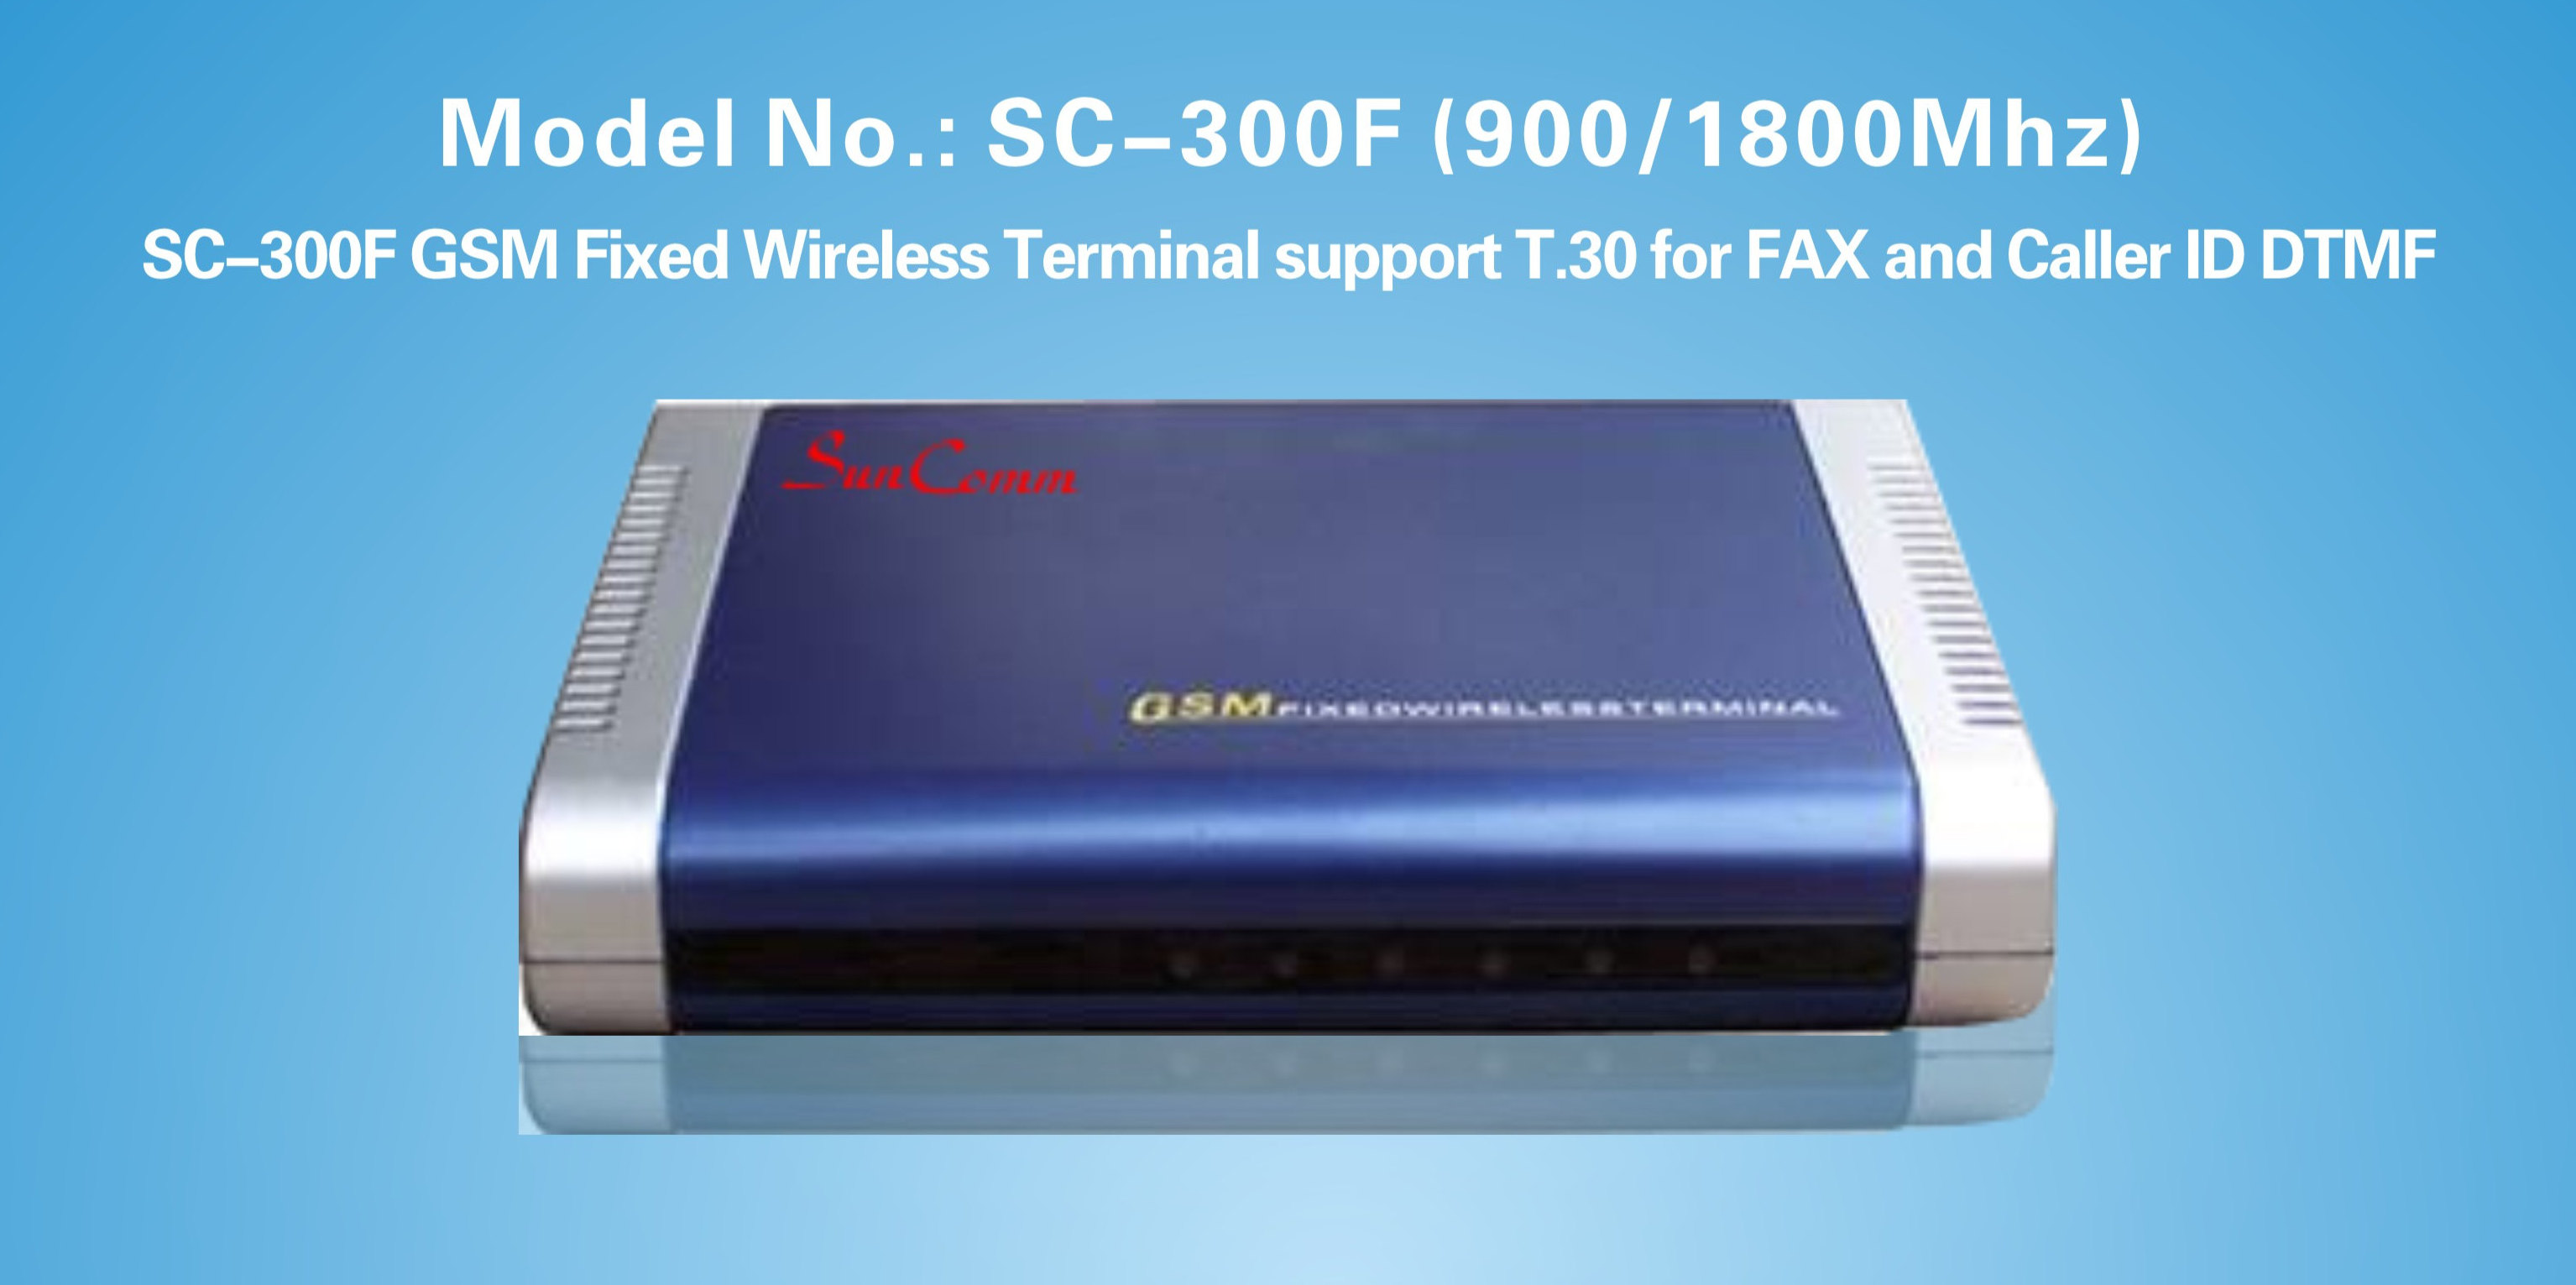 GSM Fixed Wireless Fax Terminal SC-300F